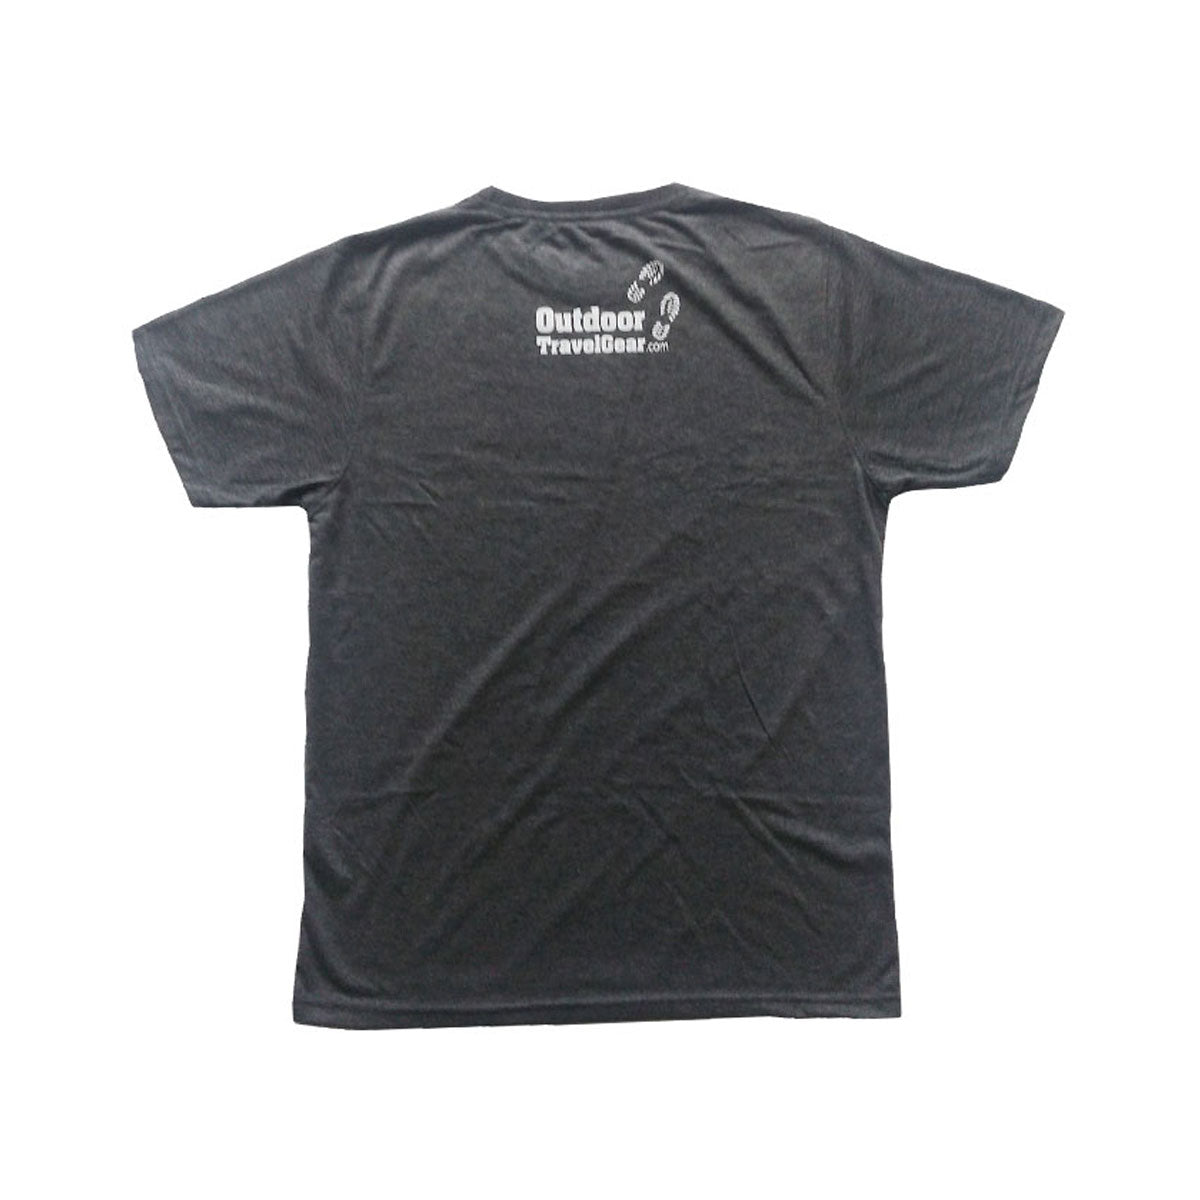 OTG Track & Trail Tee - Outdoor Travel Gear 3